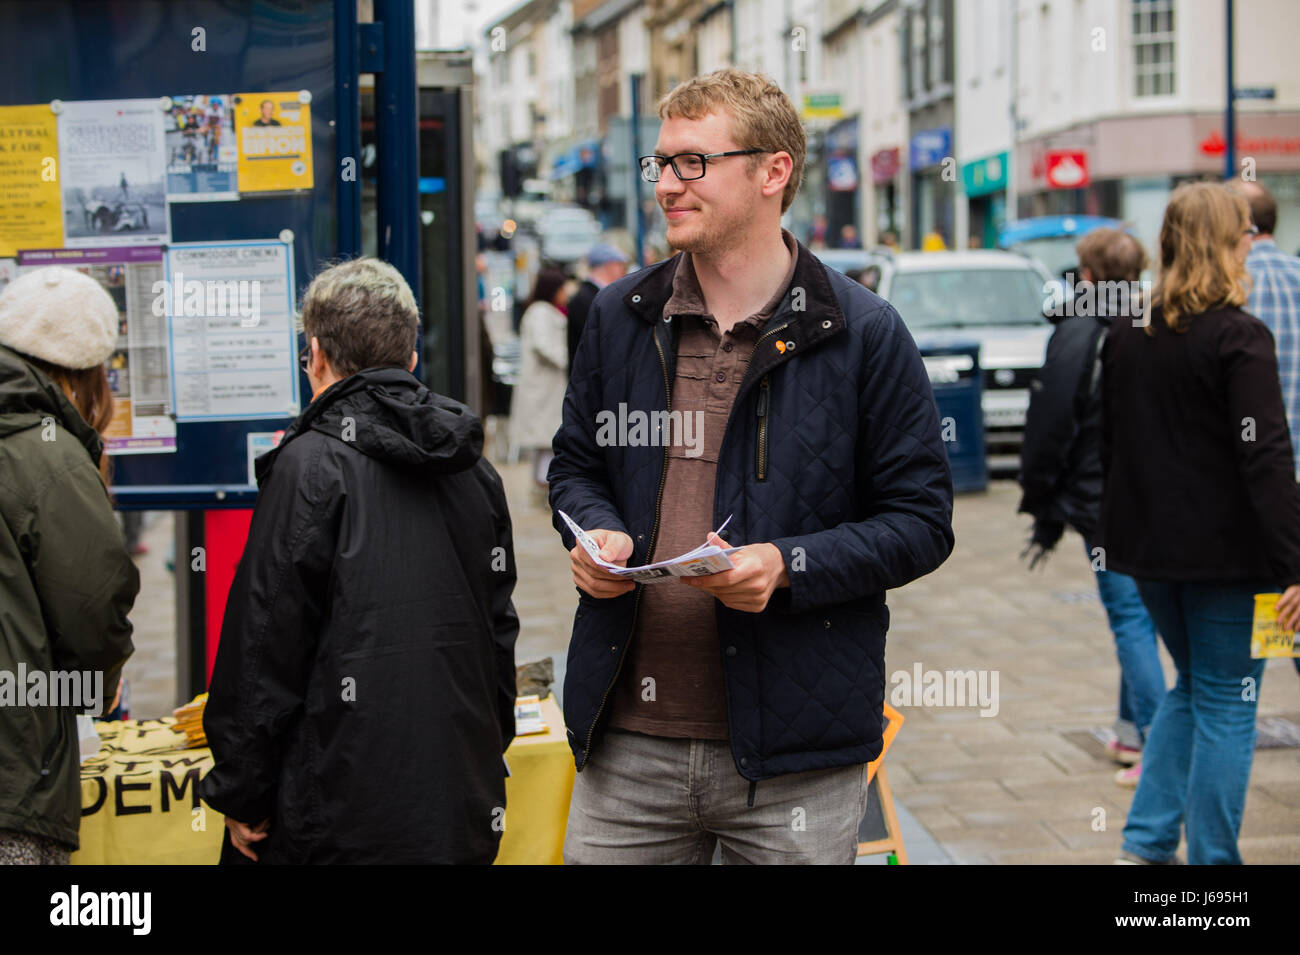 Aberystwyth Wales UK, Saturday 20 May 2017 General Election 2017: Supporters of the Lib Dems (who currently hold the Ceredigion seat) out canvassing for votes in Aberystwyth on Saturday 20 May 2017 Photo credit: Credit: keith morris /Alamy Live News Stock Photo